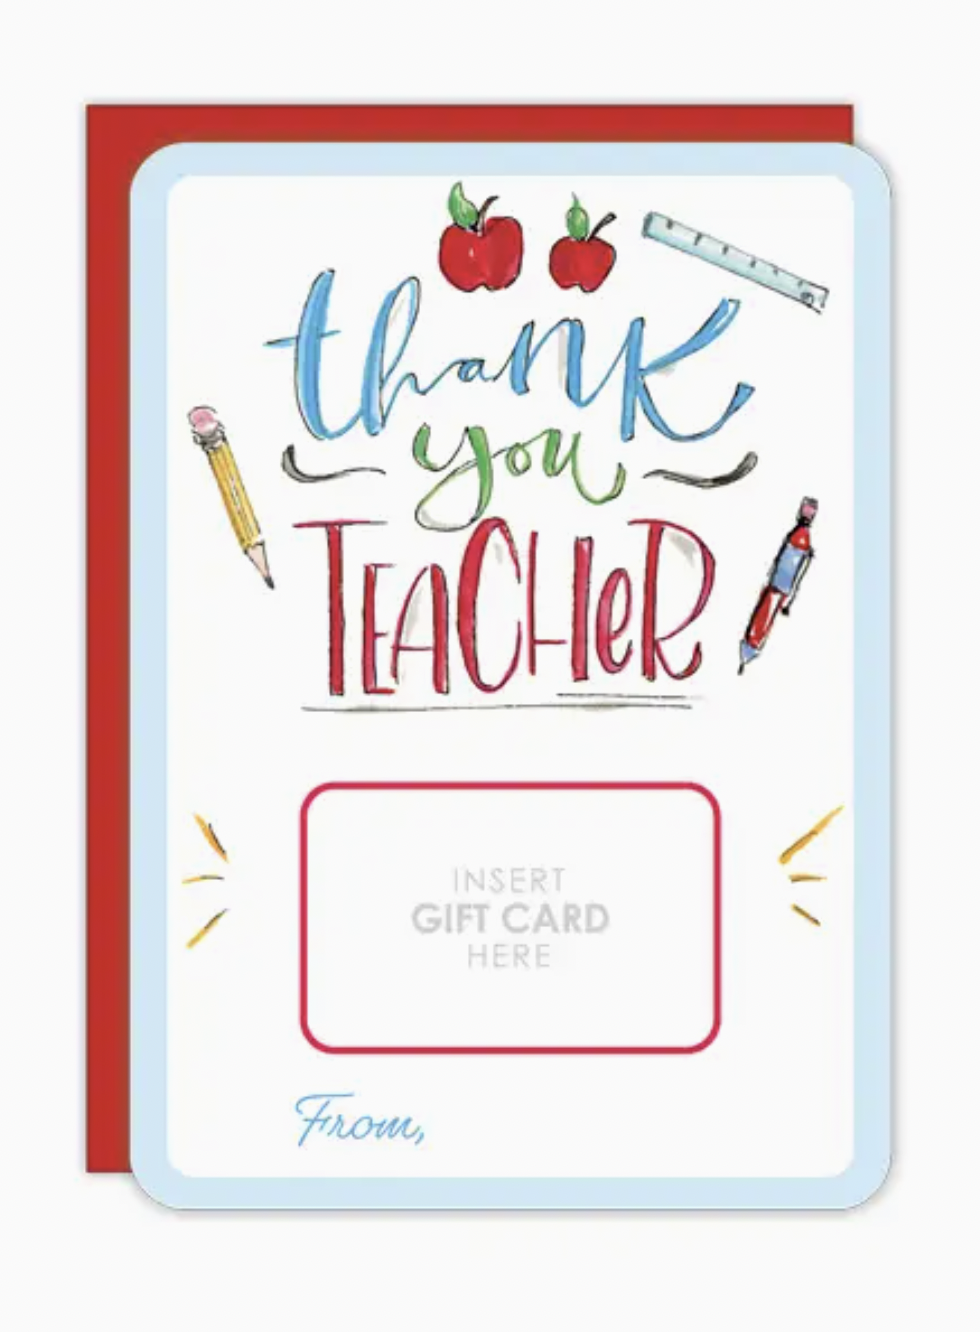 Thank you Teacher - Giftcard Greeting Card